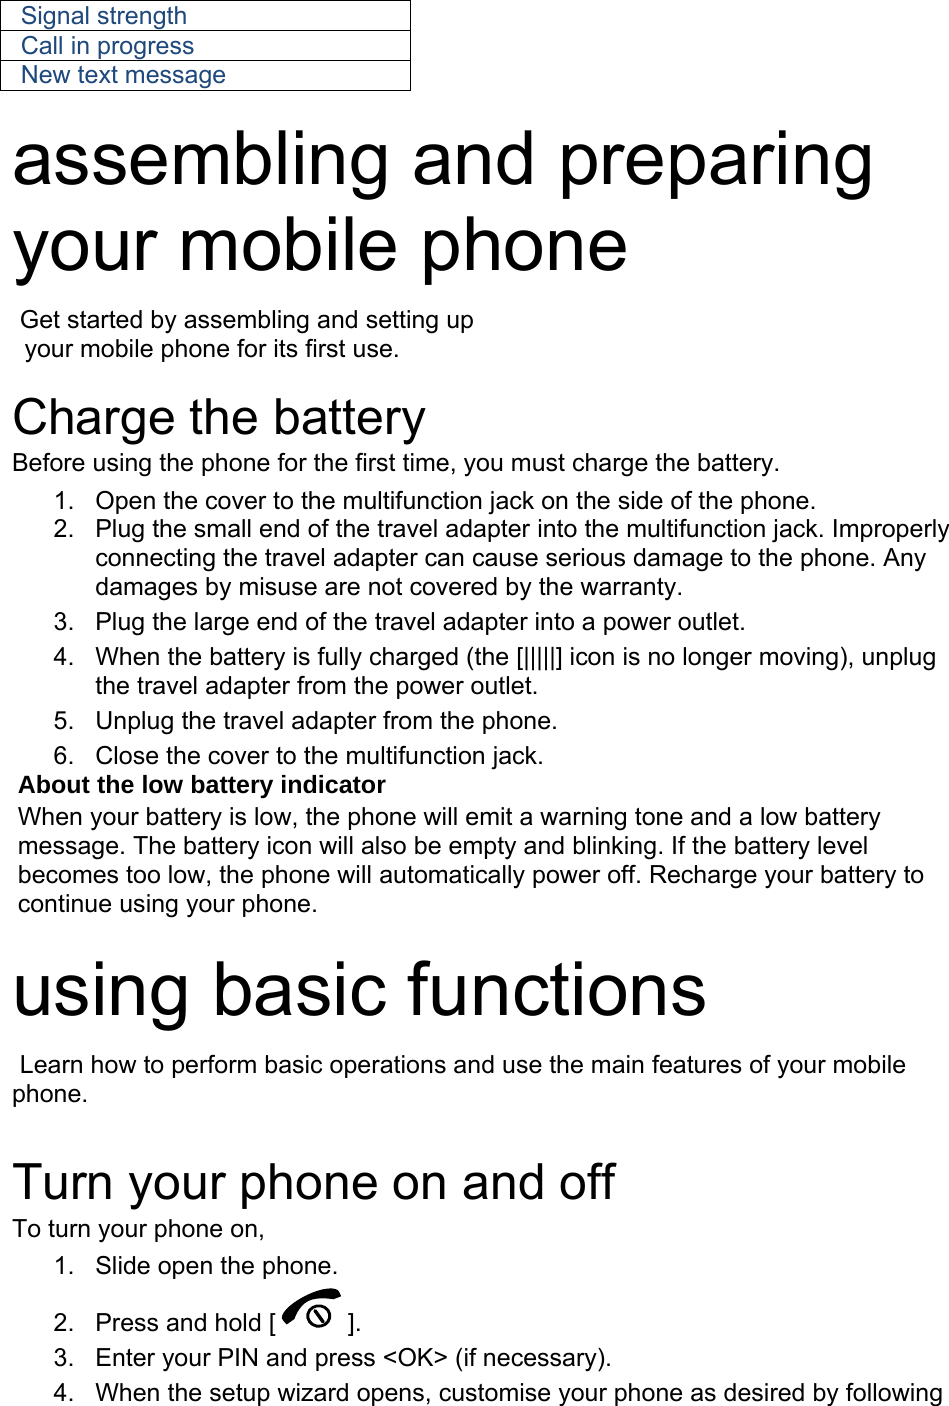 Signal strength Call in progress New text message  assembling and preparing your mobile phone    Get started by assembling and setting up     your mobile phone for its first use.  Charge the battery Before using the phone for the first time, you must charge the battery. 1.  Open the cover to the multifunction jack on the side of the phone. 2.  Plug the small end of the travel adapter into the multifunction jack. Improperly connecting the travel adapter can cause serious damage to the phone. Any damages by misuse are not covered by the warranty. 3.  Plug the large end of the travel adapter into a power outlet. 4.  When the battery is fully charged (the [|||||] icon is no longer moving), unplug the travel adapter from the power outlet. 5.  Unplug the travel adapter from the phone. 6.  Close the cover to the multifunction jack. About the low battery indicator When your battery is low, the phone will emit a warning tone and a low battery message. The battery icon will also be empty and blinking. If the battery level becomes too low, the phone will automatically power off. Recharge your battery to continue using your phone.  using basic functions  Learn how to perform basic operations and use the main features of your mobile phone.   Turn your phone on and off To turn your phone on, 1.  Slide open the phone. 2.  Press and hold [ ]. 3.  Enter your PIN and press &lt;OK&gt; (if necessary). 4.  When the setup wizard opens, customise your phone as desired by following 